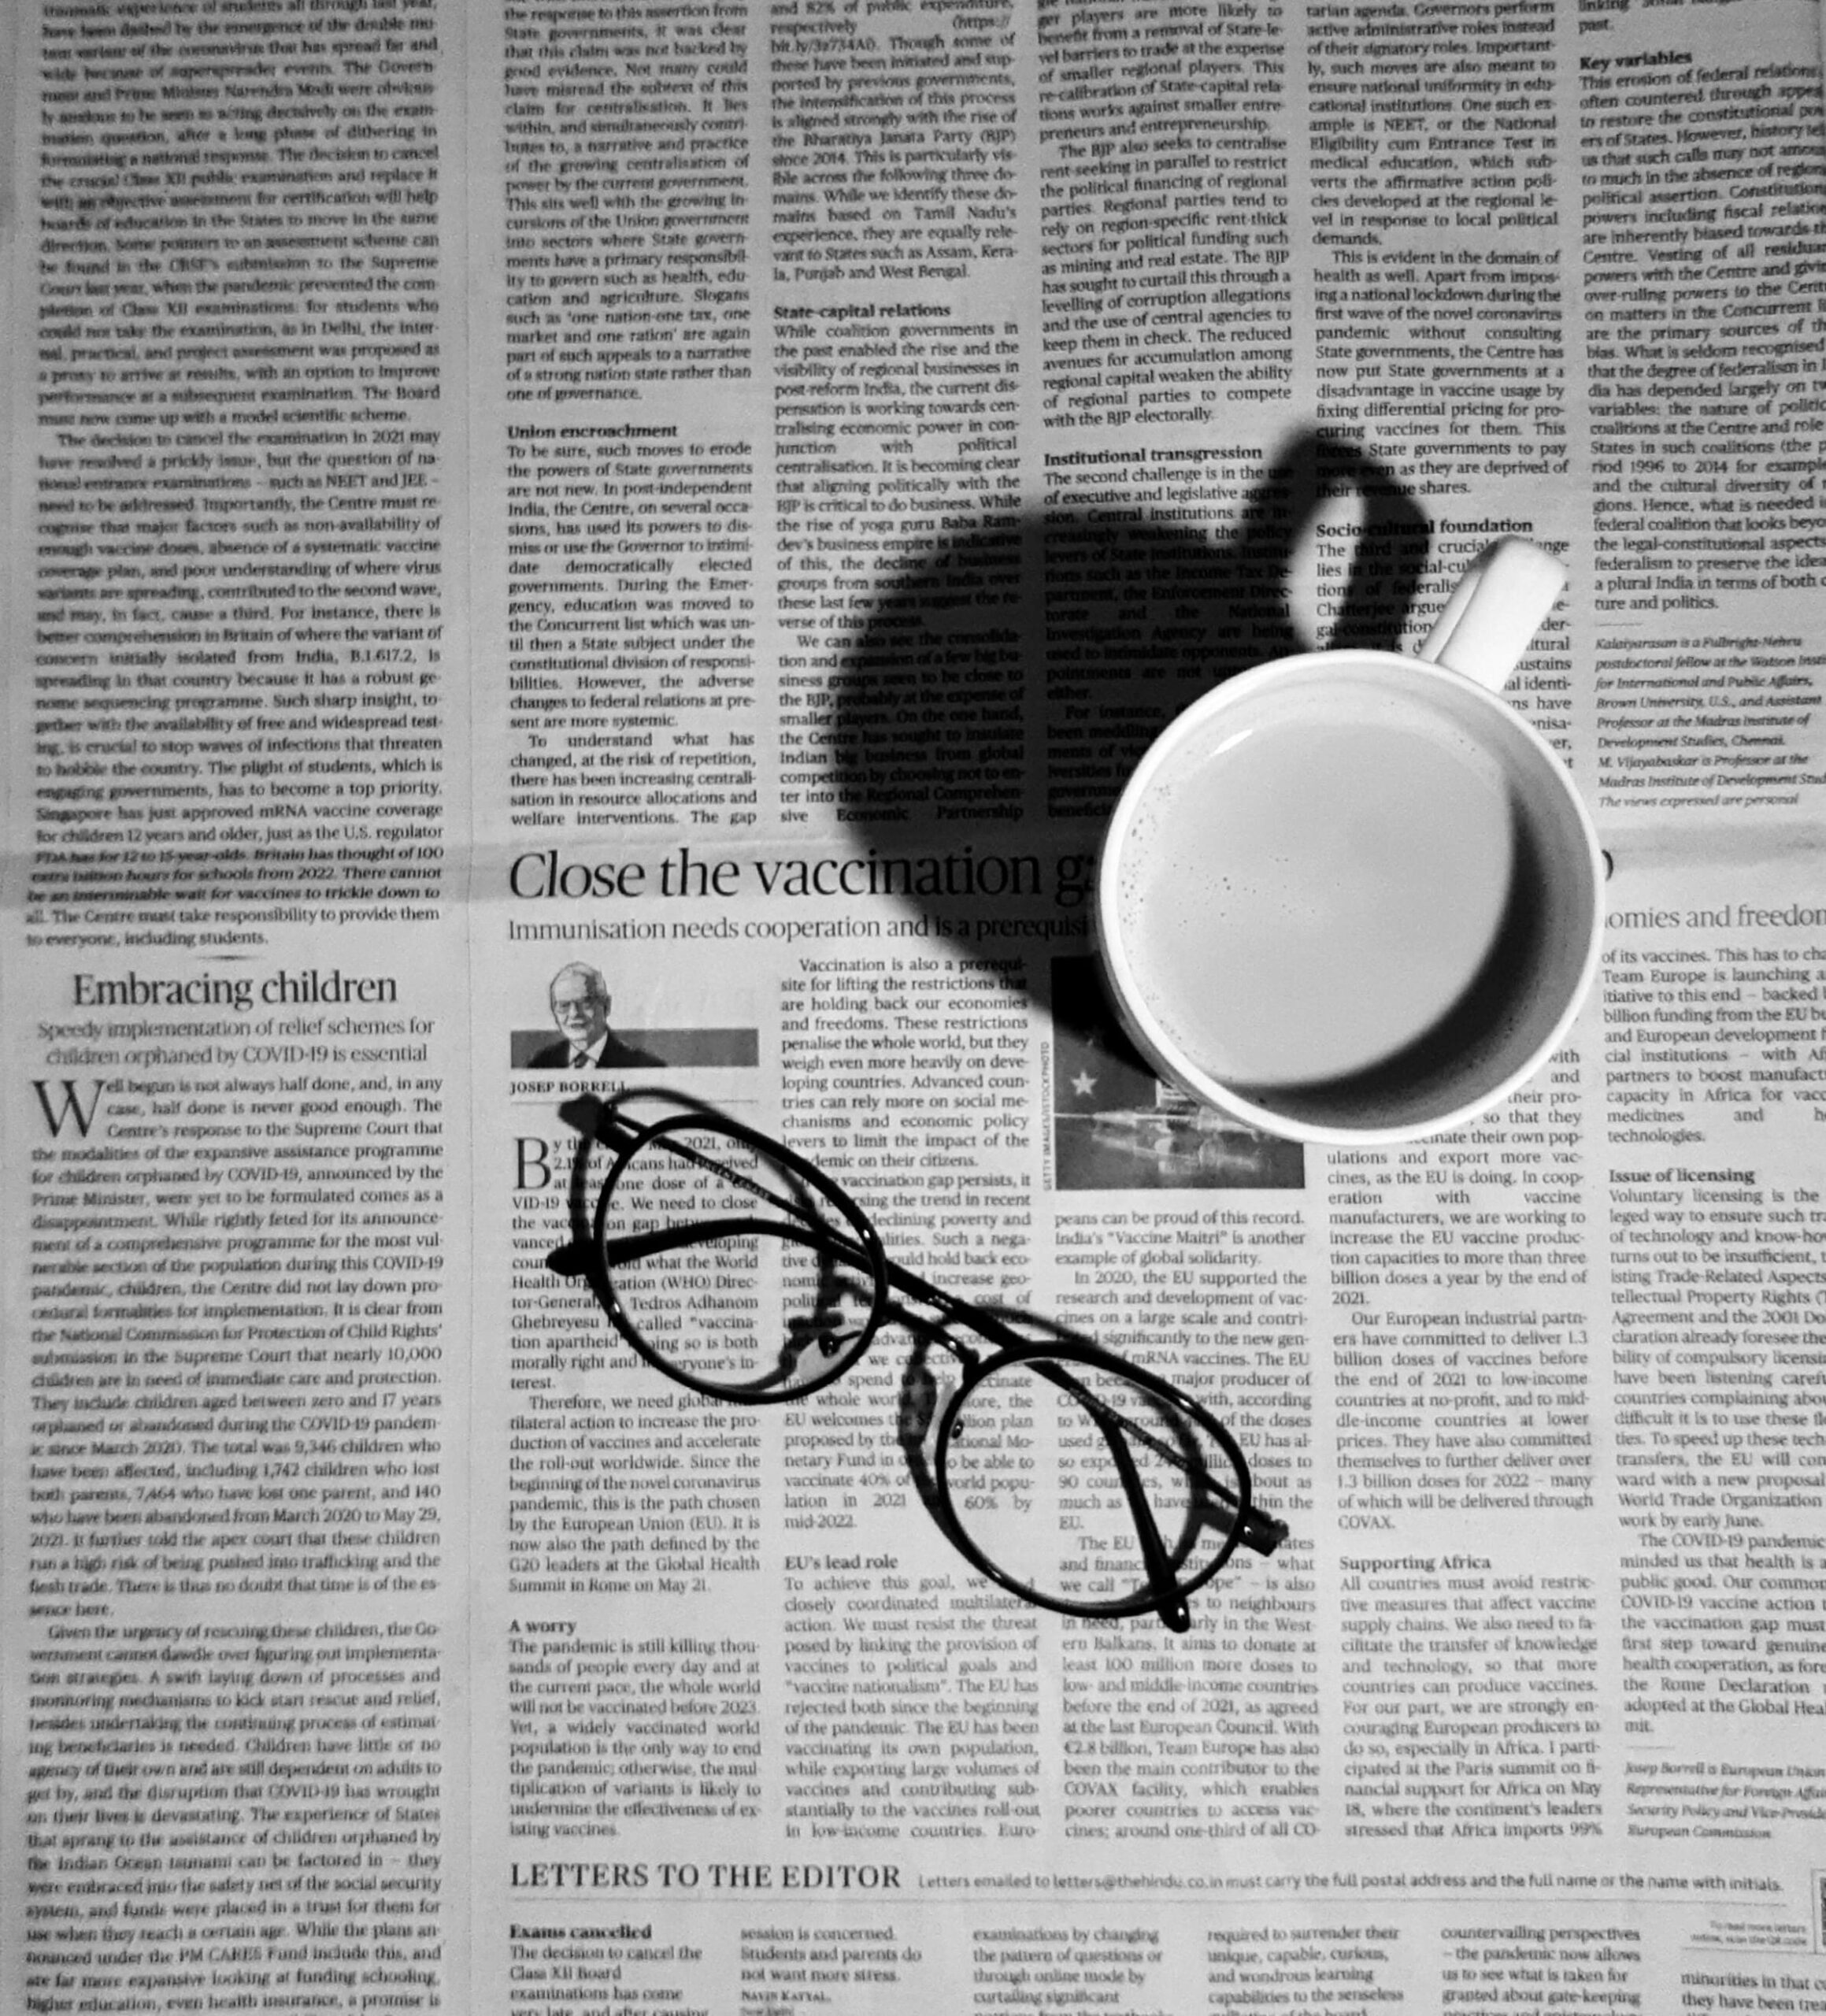 A coffee mug and pair of reading glasses on top on a newspaper.